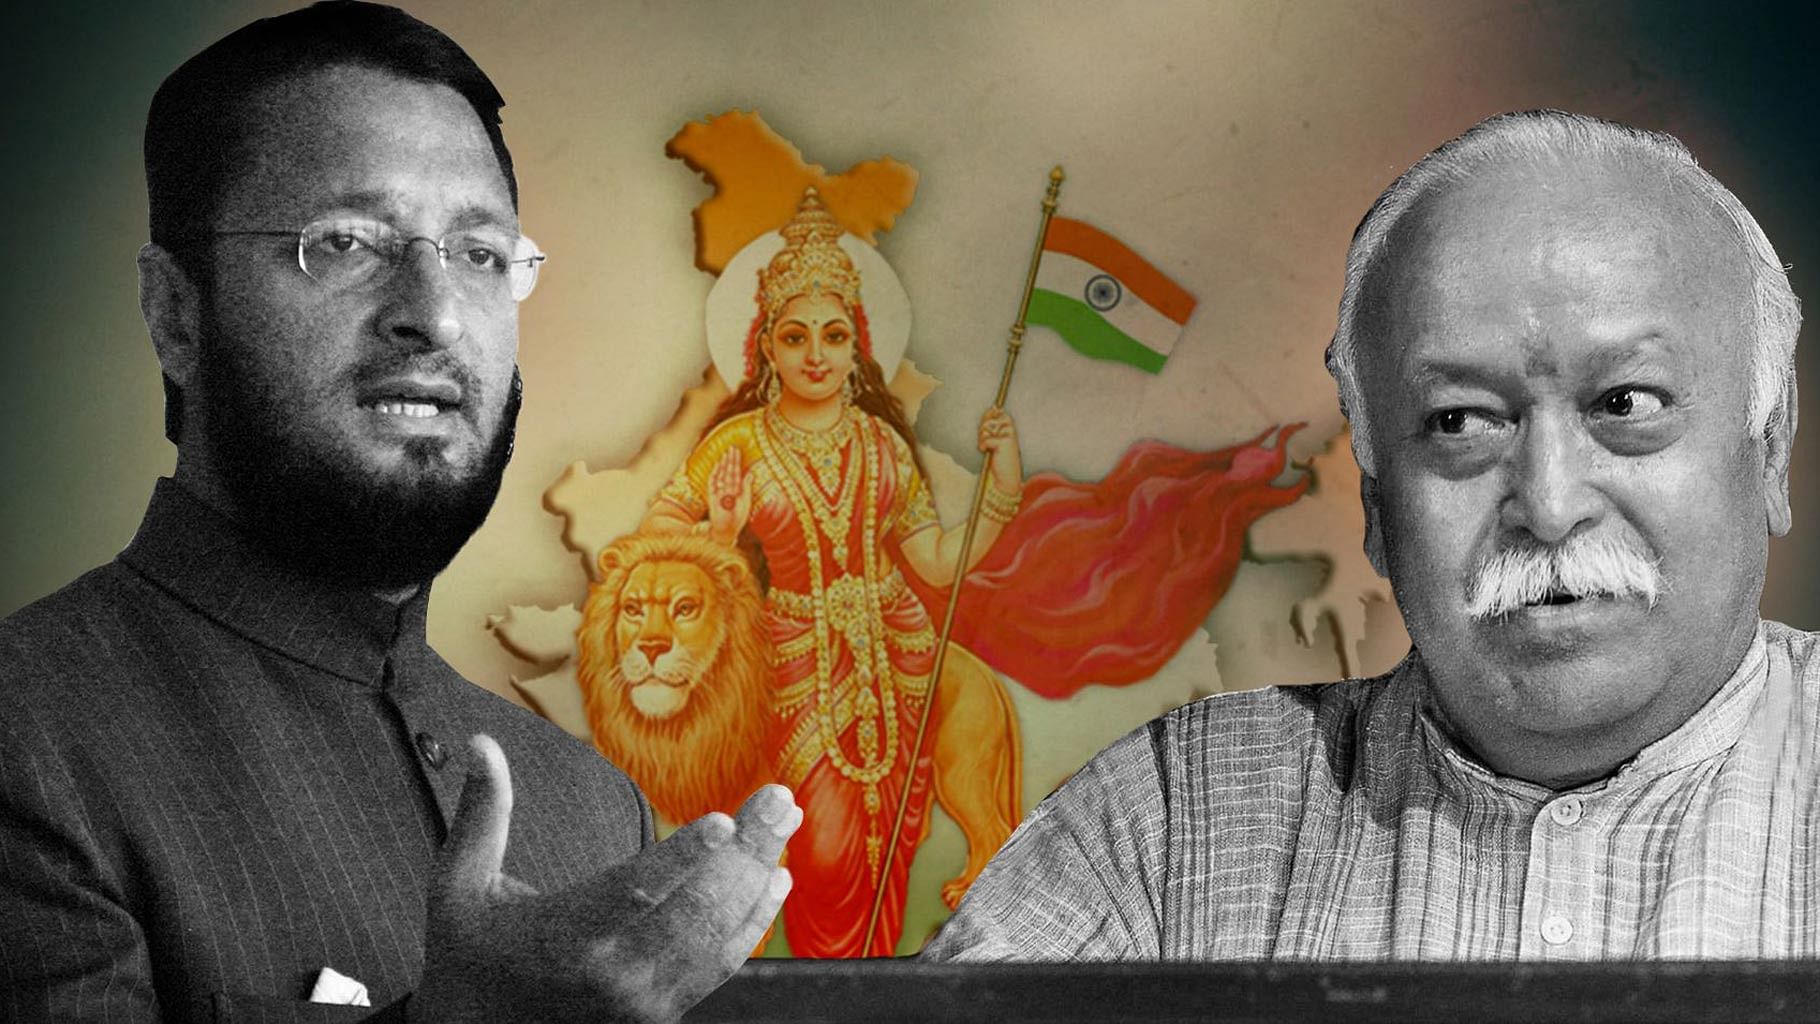 The fight over Bharat Mata Ki Jai between Asaduddin Owaisi and Mohan Bhagwat has attracted fatwas against the chant. (Photo: <b>The Quint</b>)